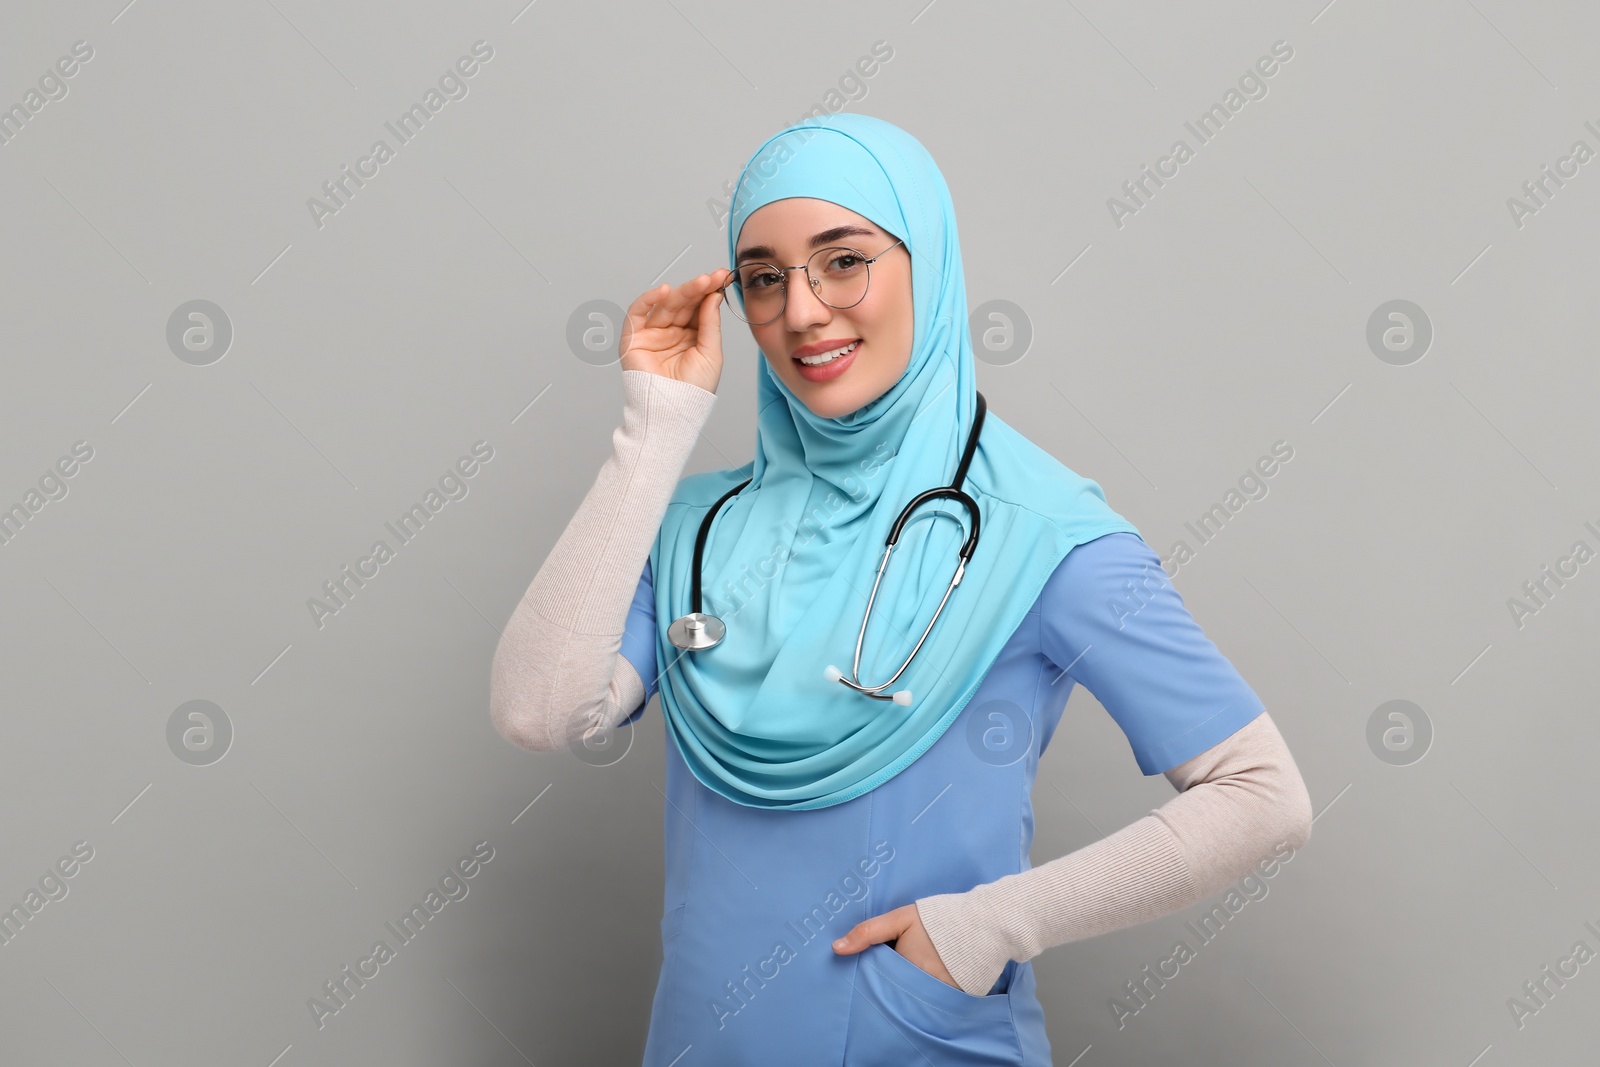 Photo of Muslim woman wearing hijab, medical uniform with stethoscope on light gray background